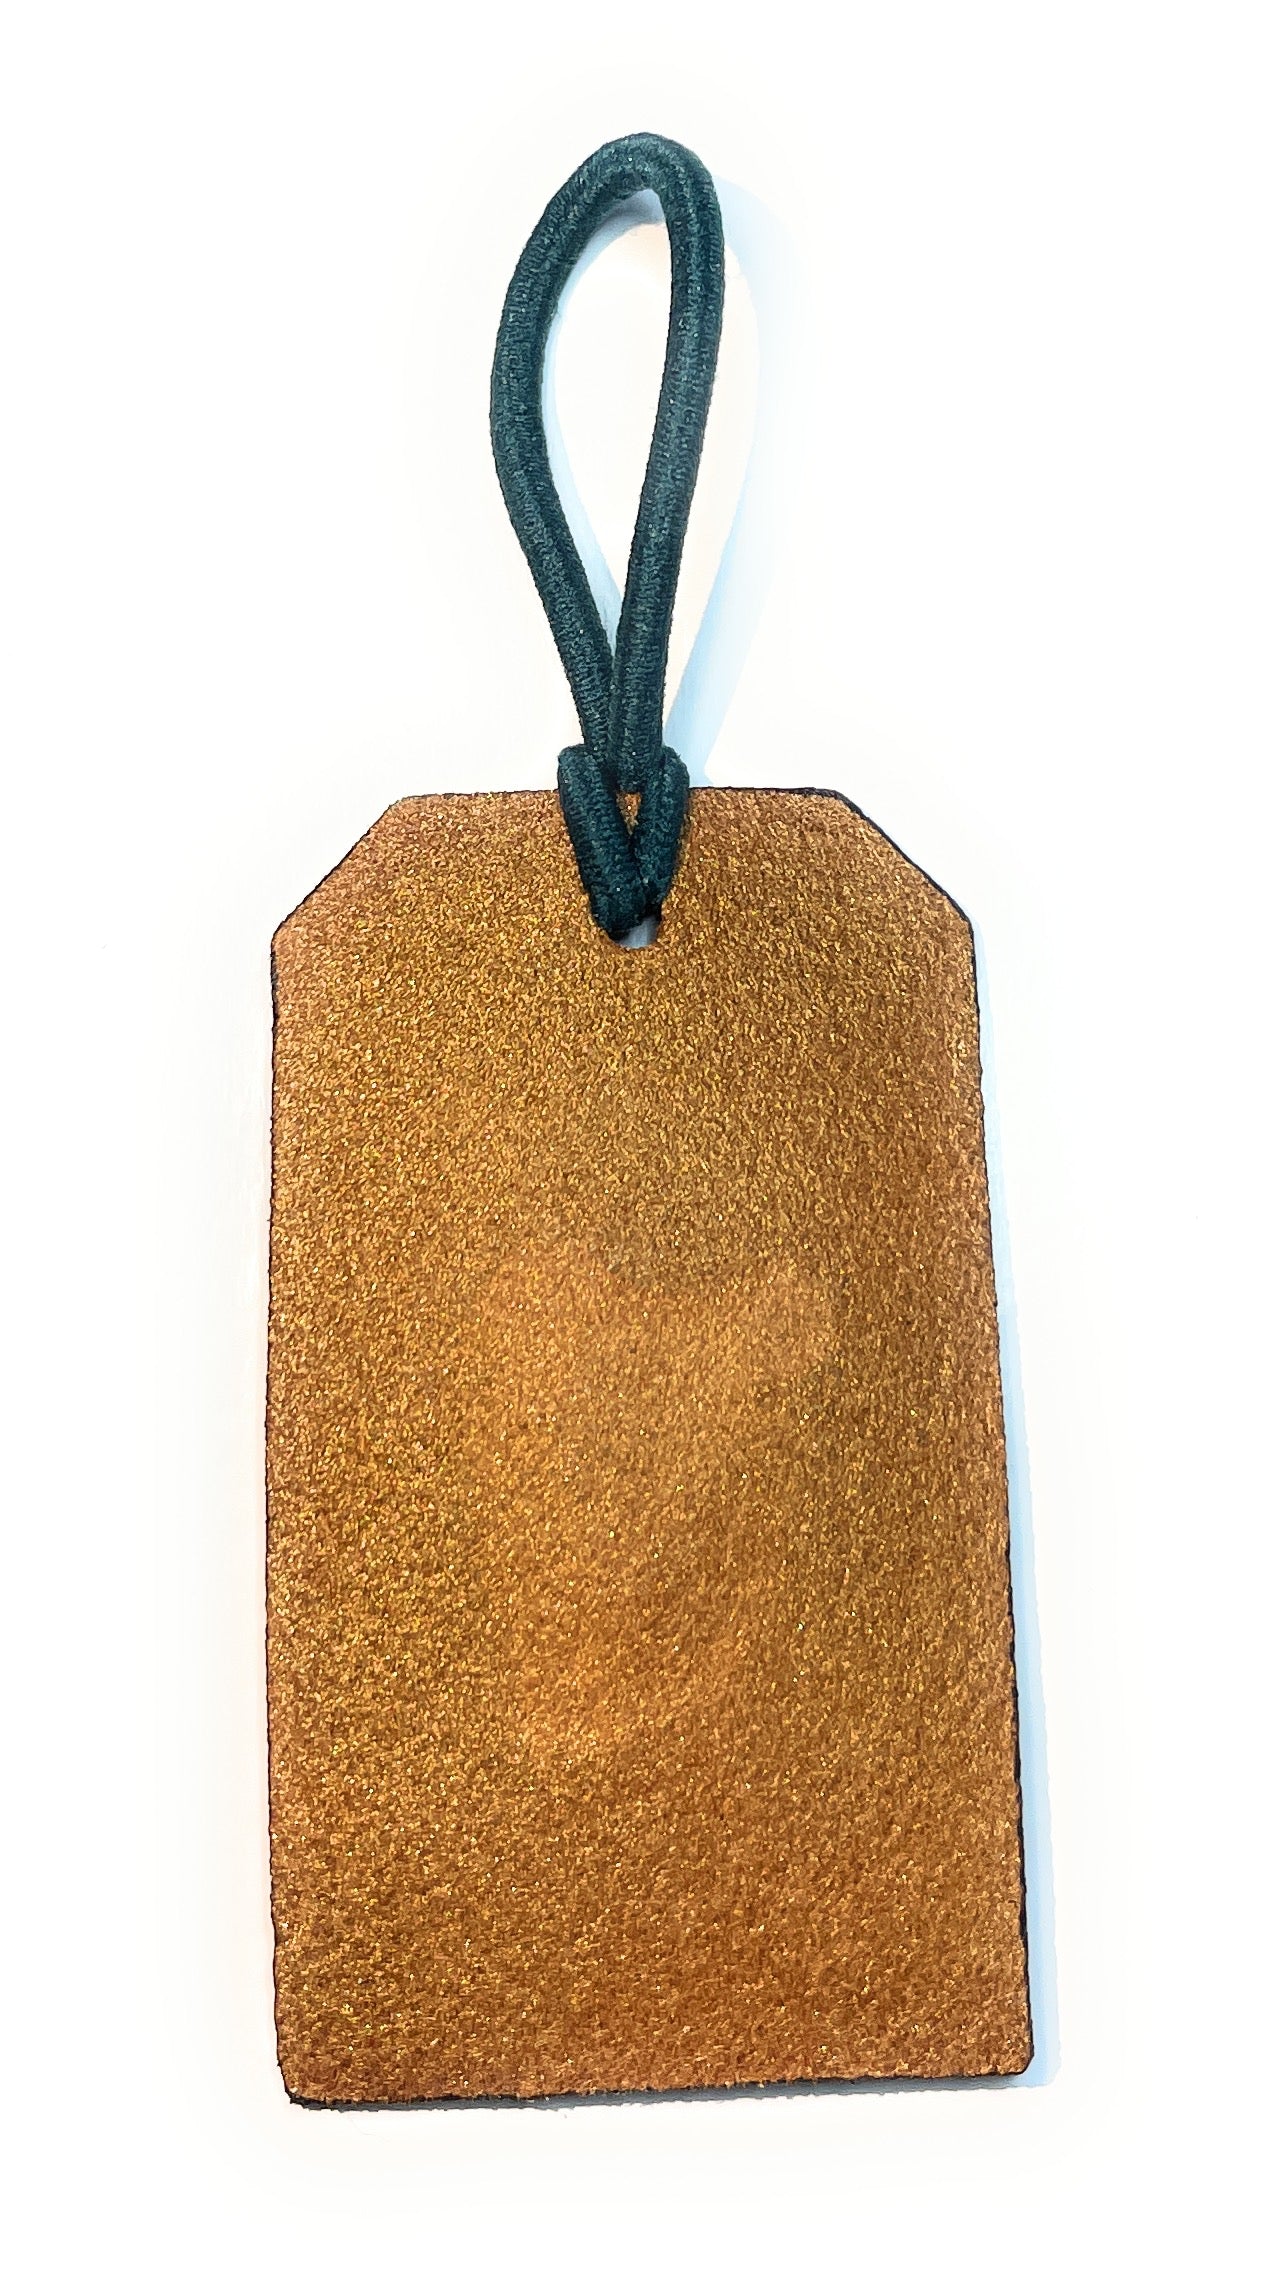 Gold Harp Leather Luggage Tag